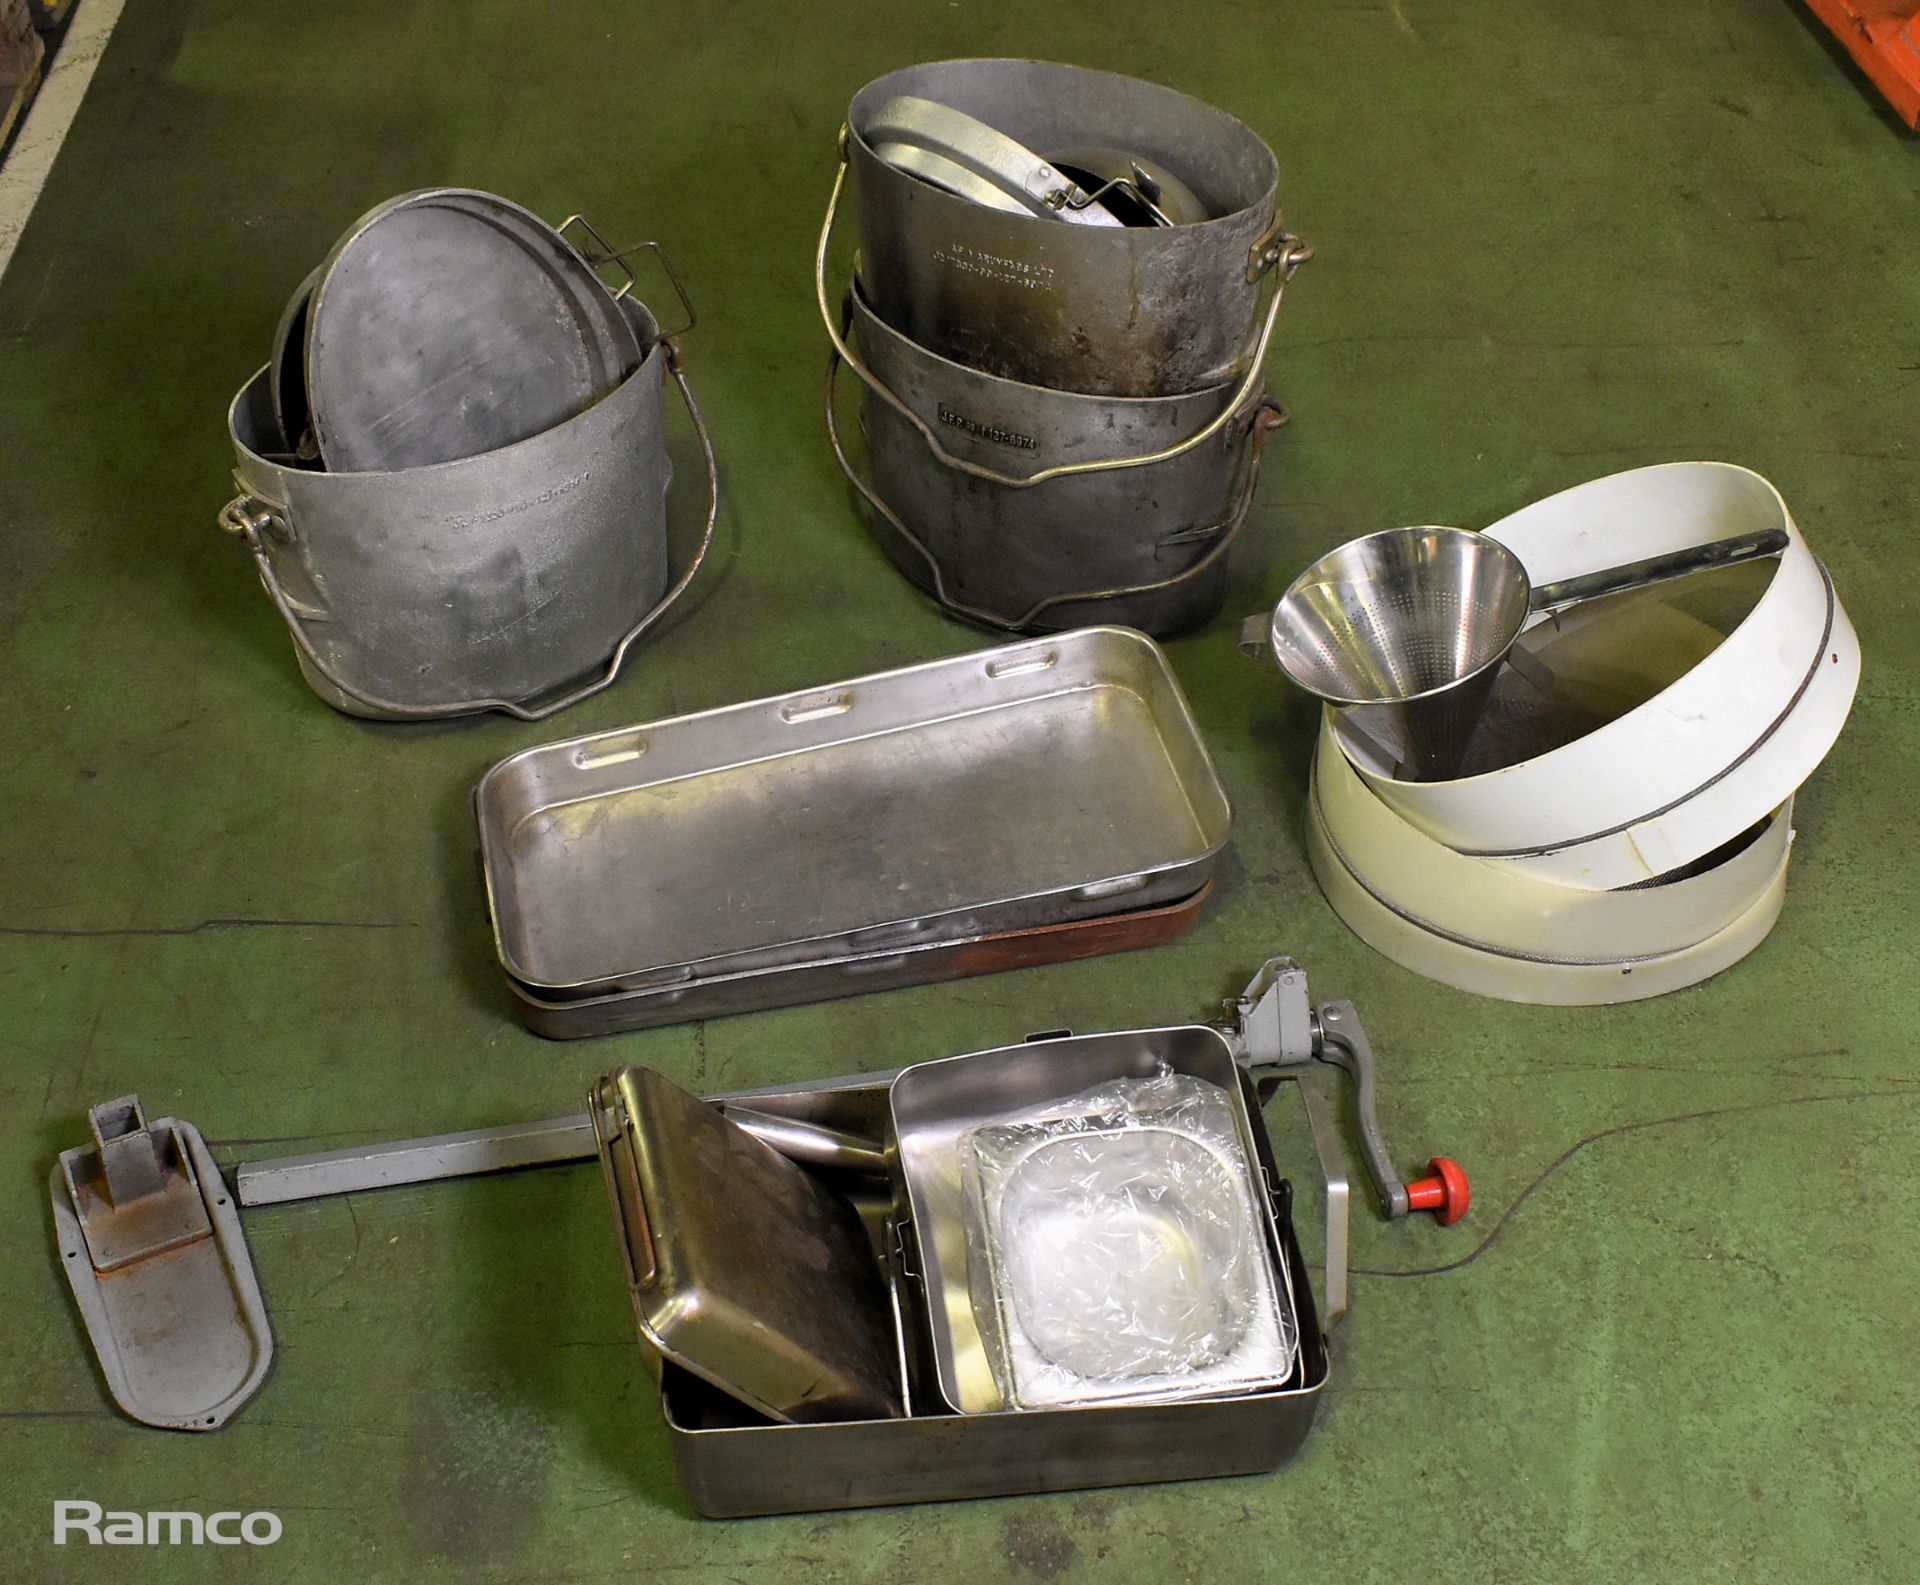 Catering supplies - Pans, baking trays, countertop tin opener, sieve - Image 3 of 7